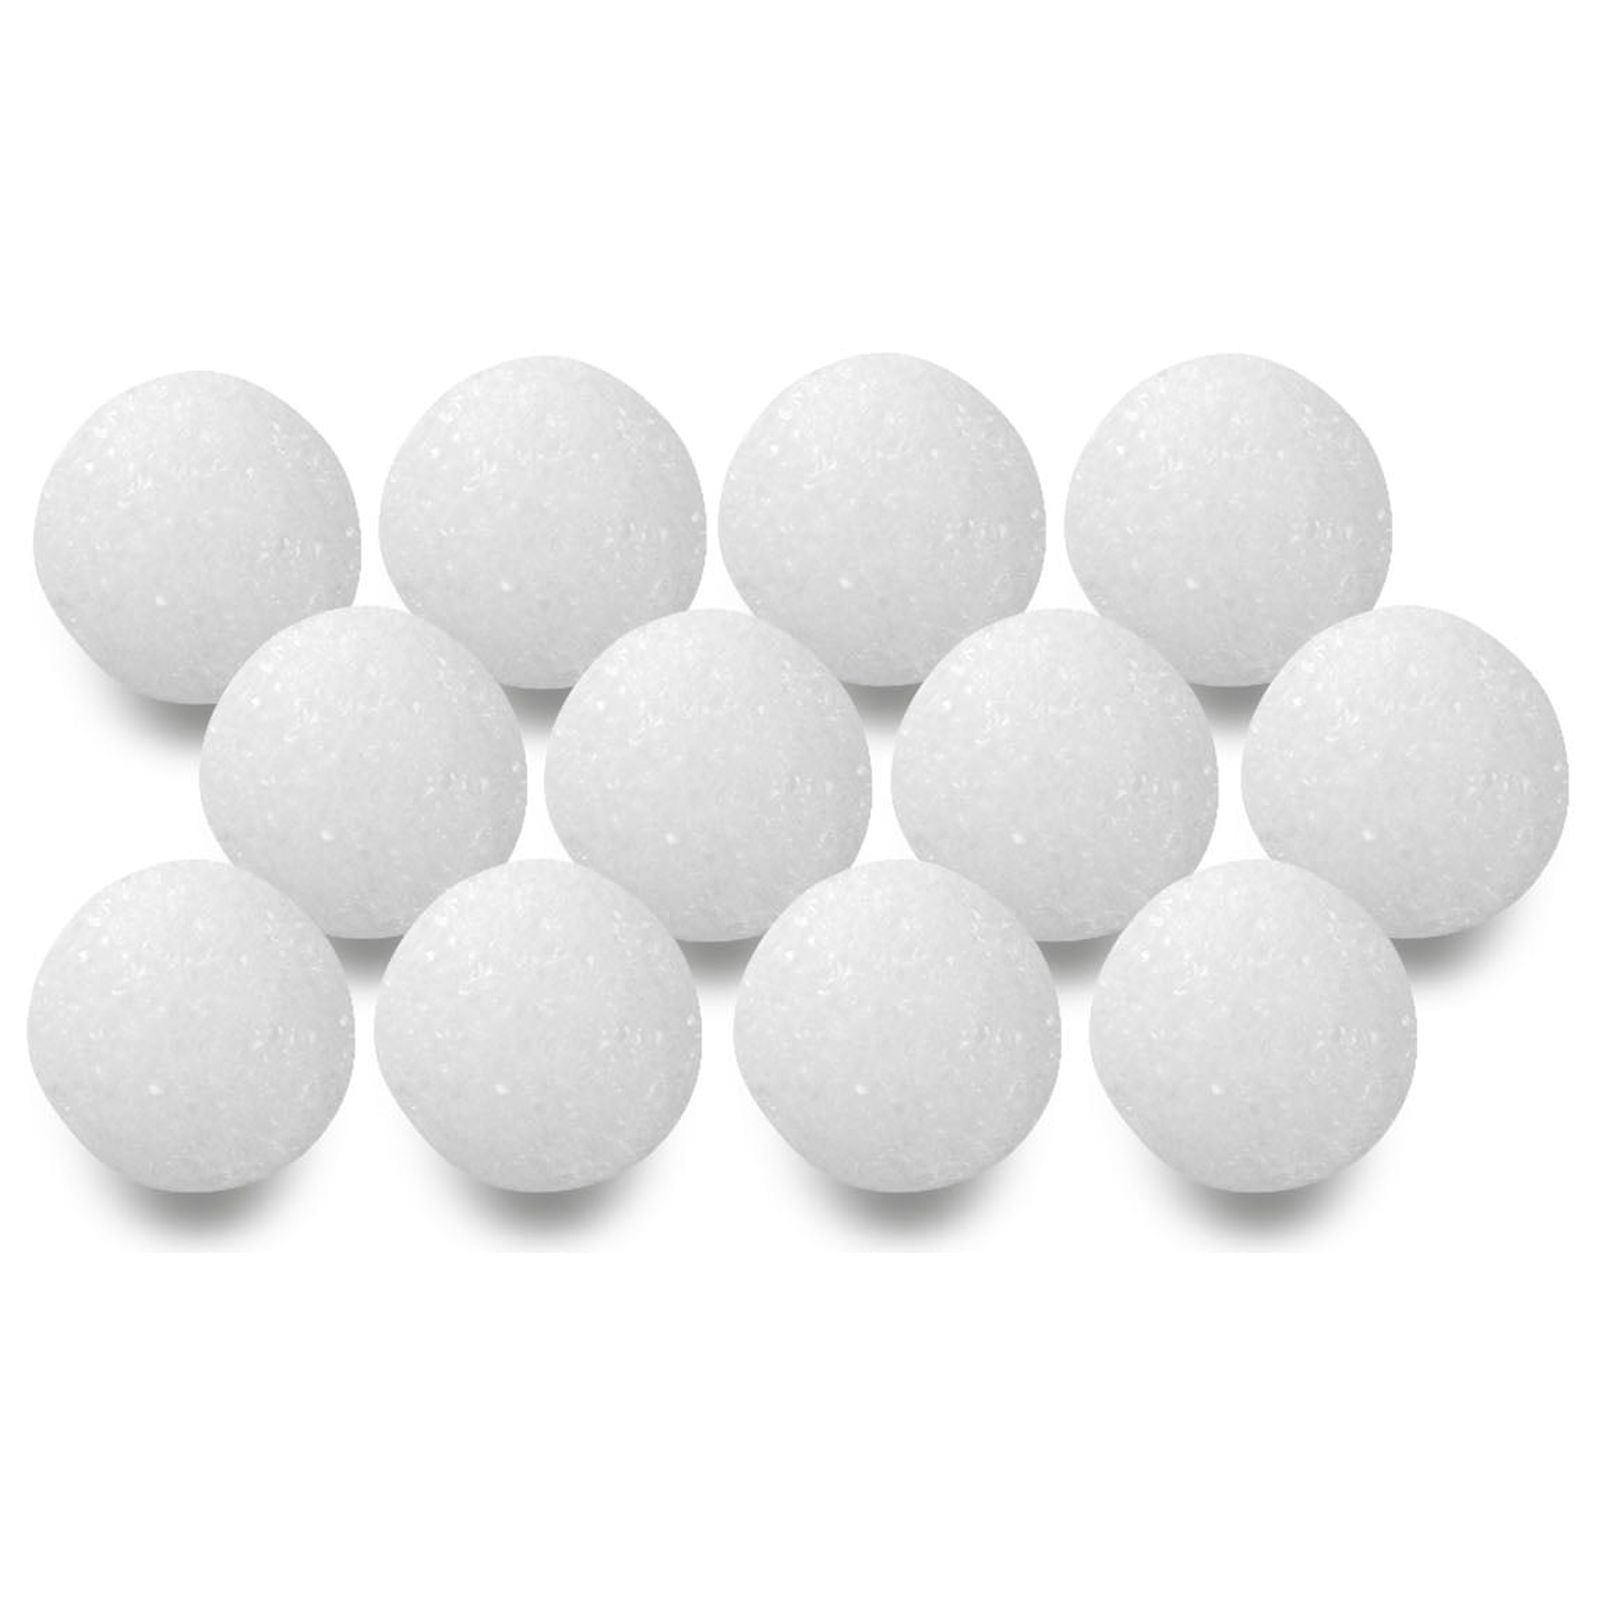 50-PACK 50mm(2) Polystyrene Foam Balls For Crafts And School Projects  ,Polystyrene Art Craft Styro White Balls Project Styrofoam on Galleon  Philippines